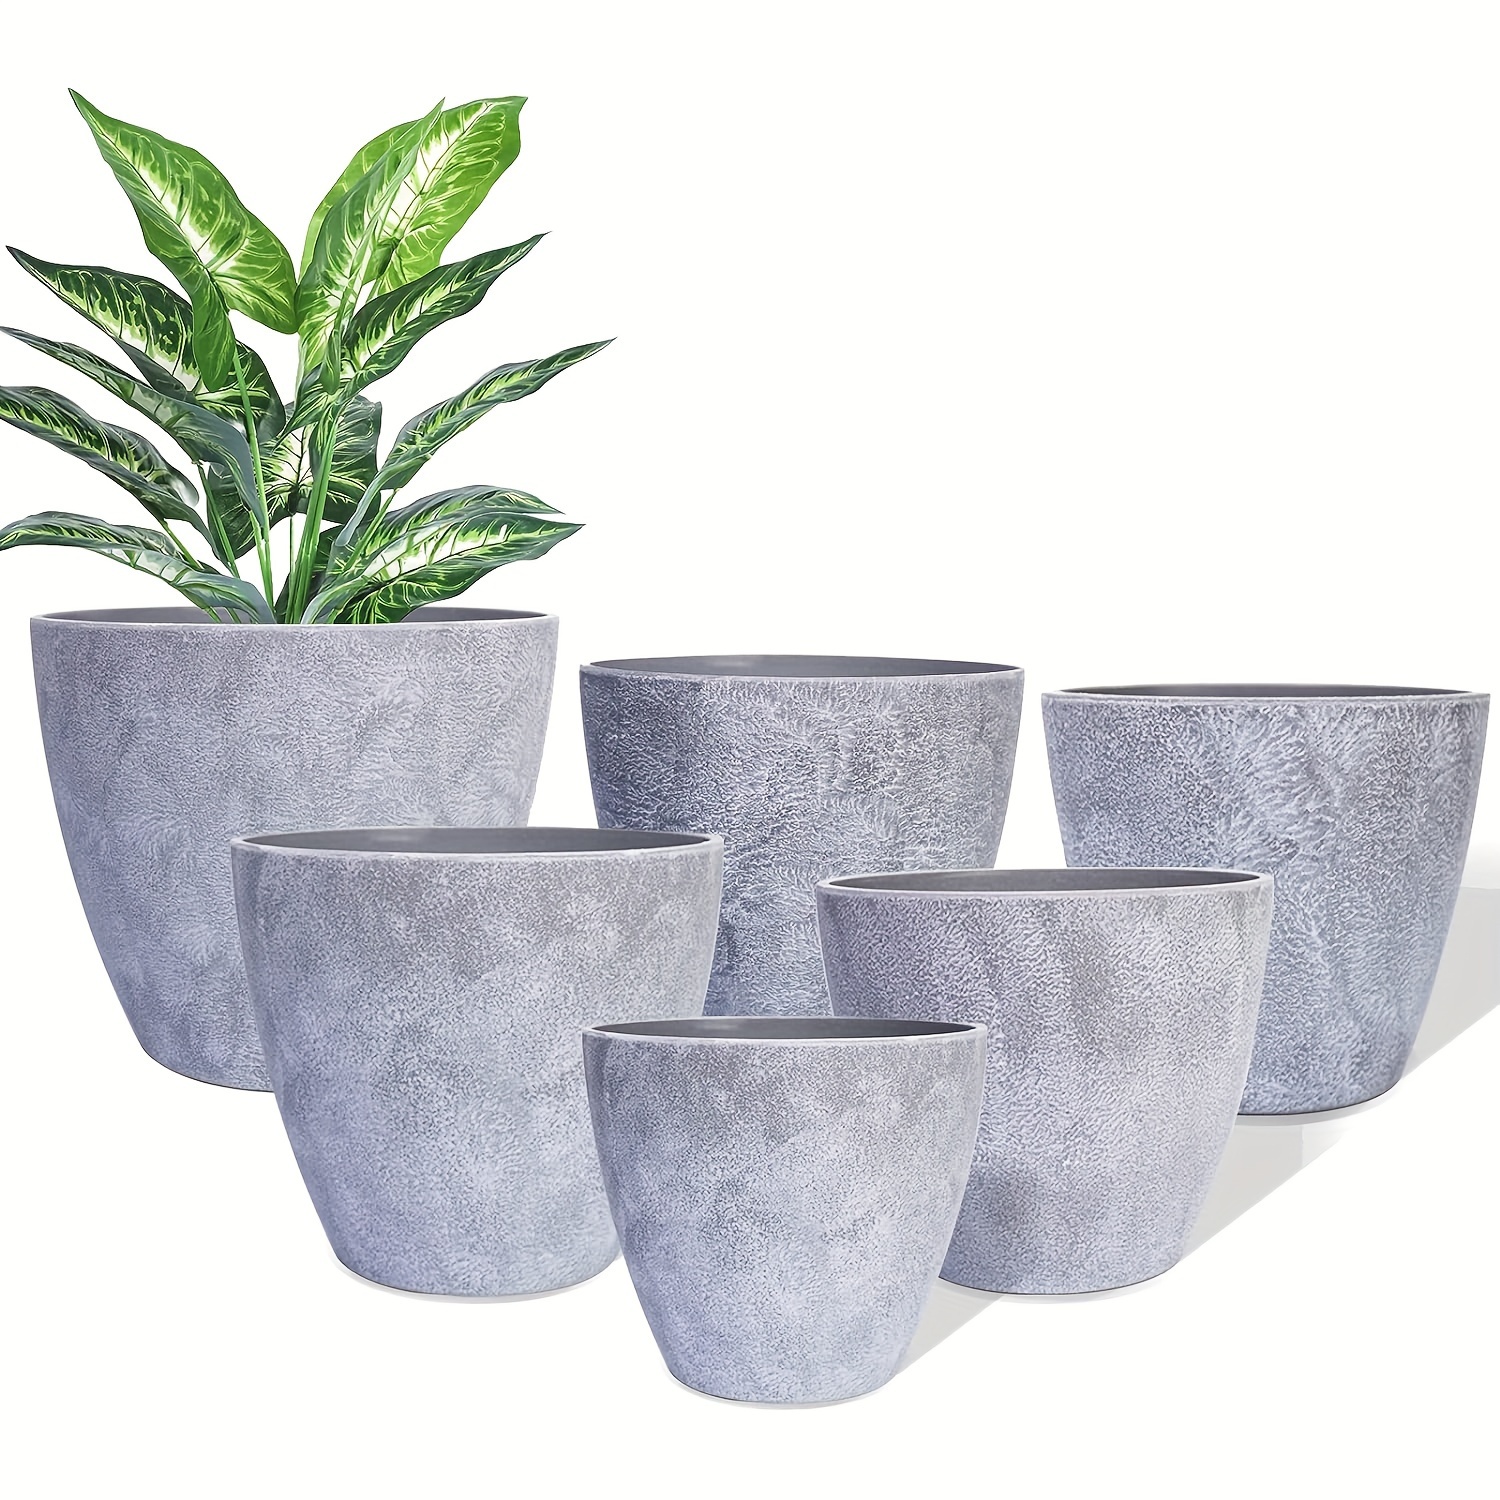 

6pcs, Plant Pots, Planters Flower Pots With Drainage Hole, Modern Decorative Planter For Indoor Outdoor Plants, Succulents, Flowers & Cactus, Perfect For Home Bedroom Garden